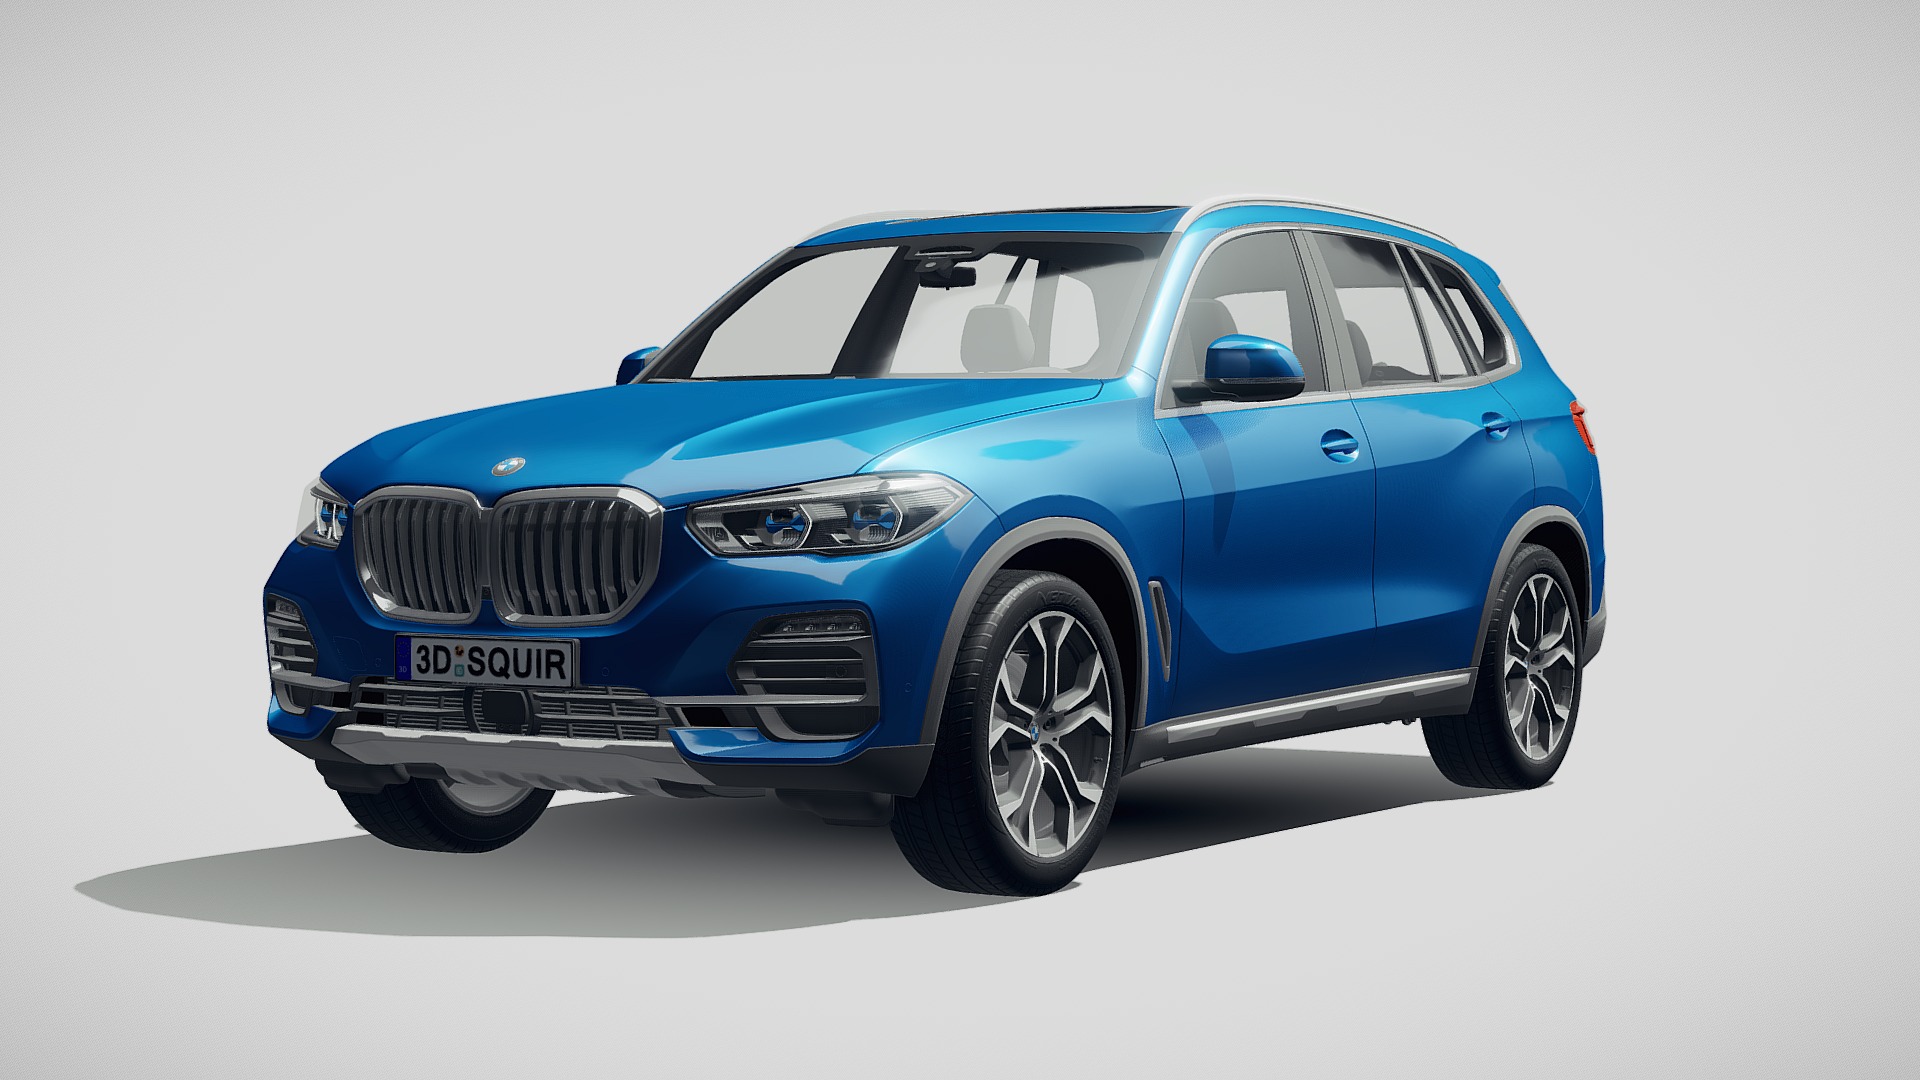 3D model BMW X5 2019 - This is a 3D model of the BMW X5 2019. The 3D model is about a blue car with a white background.